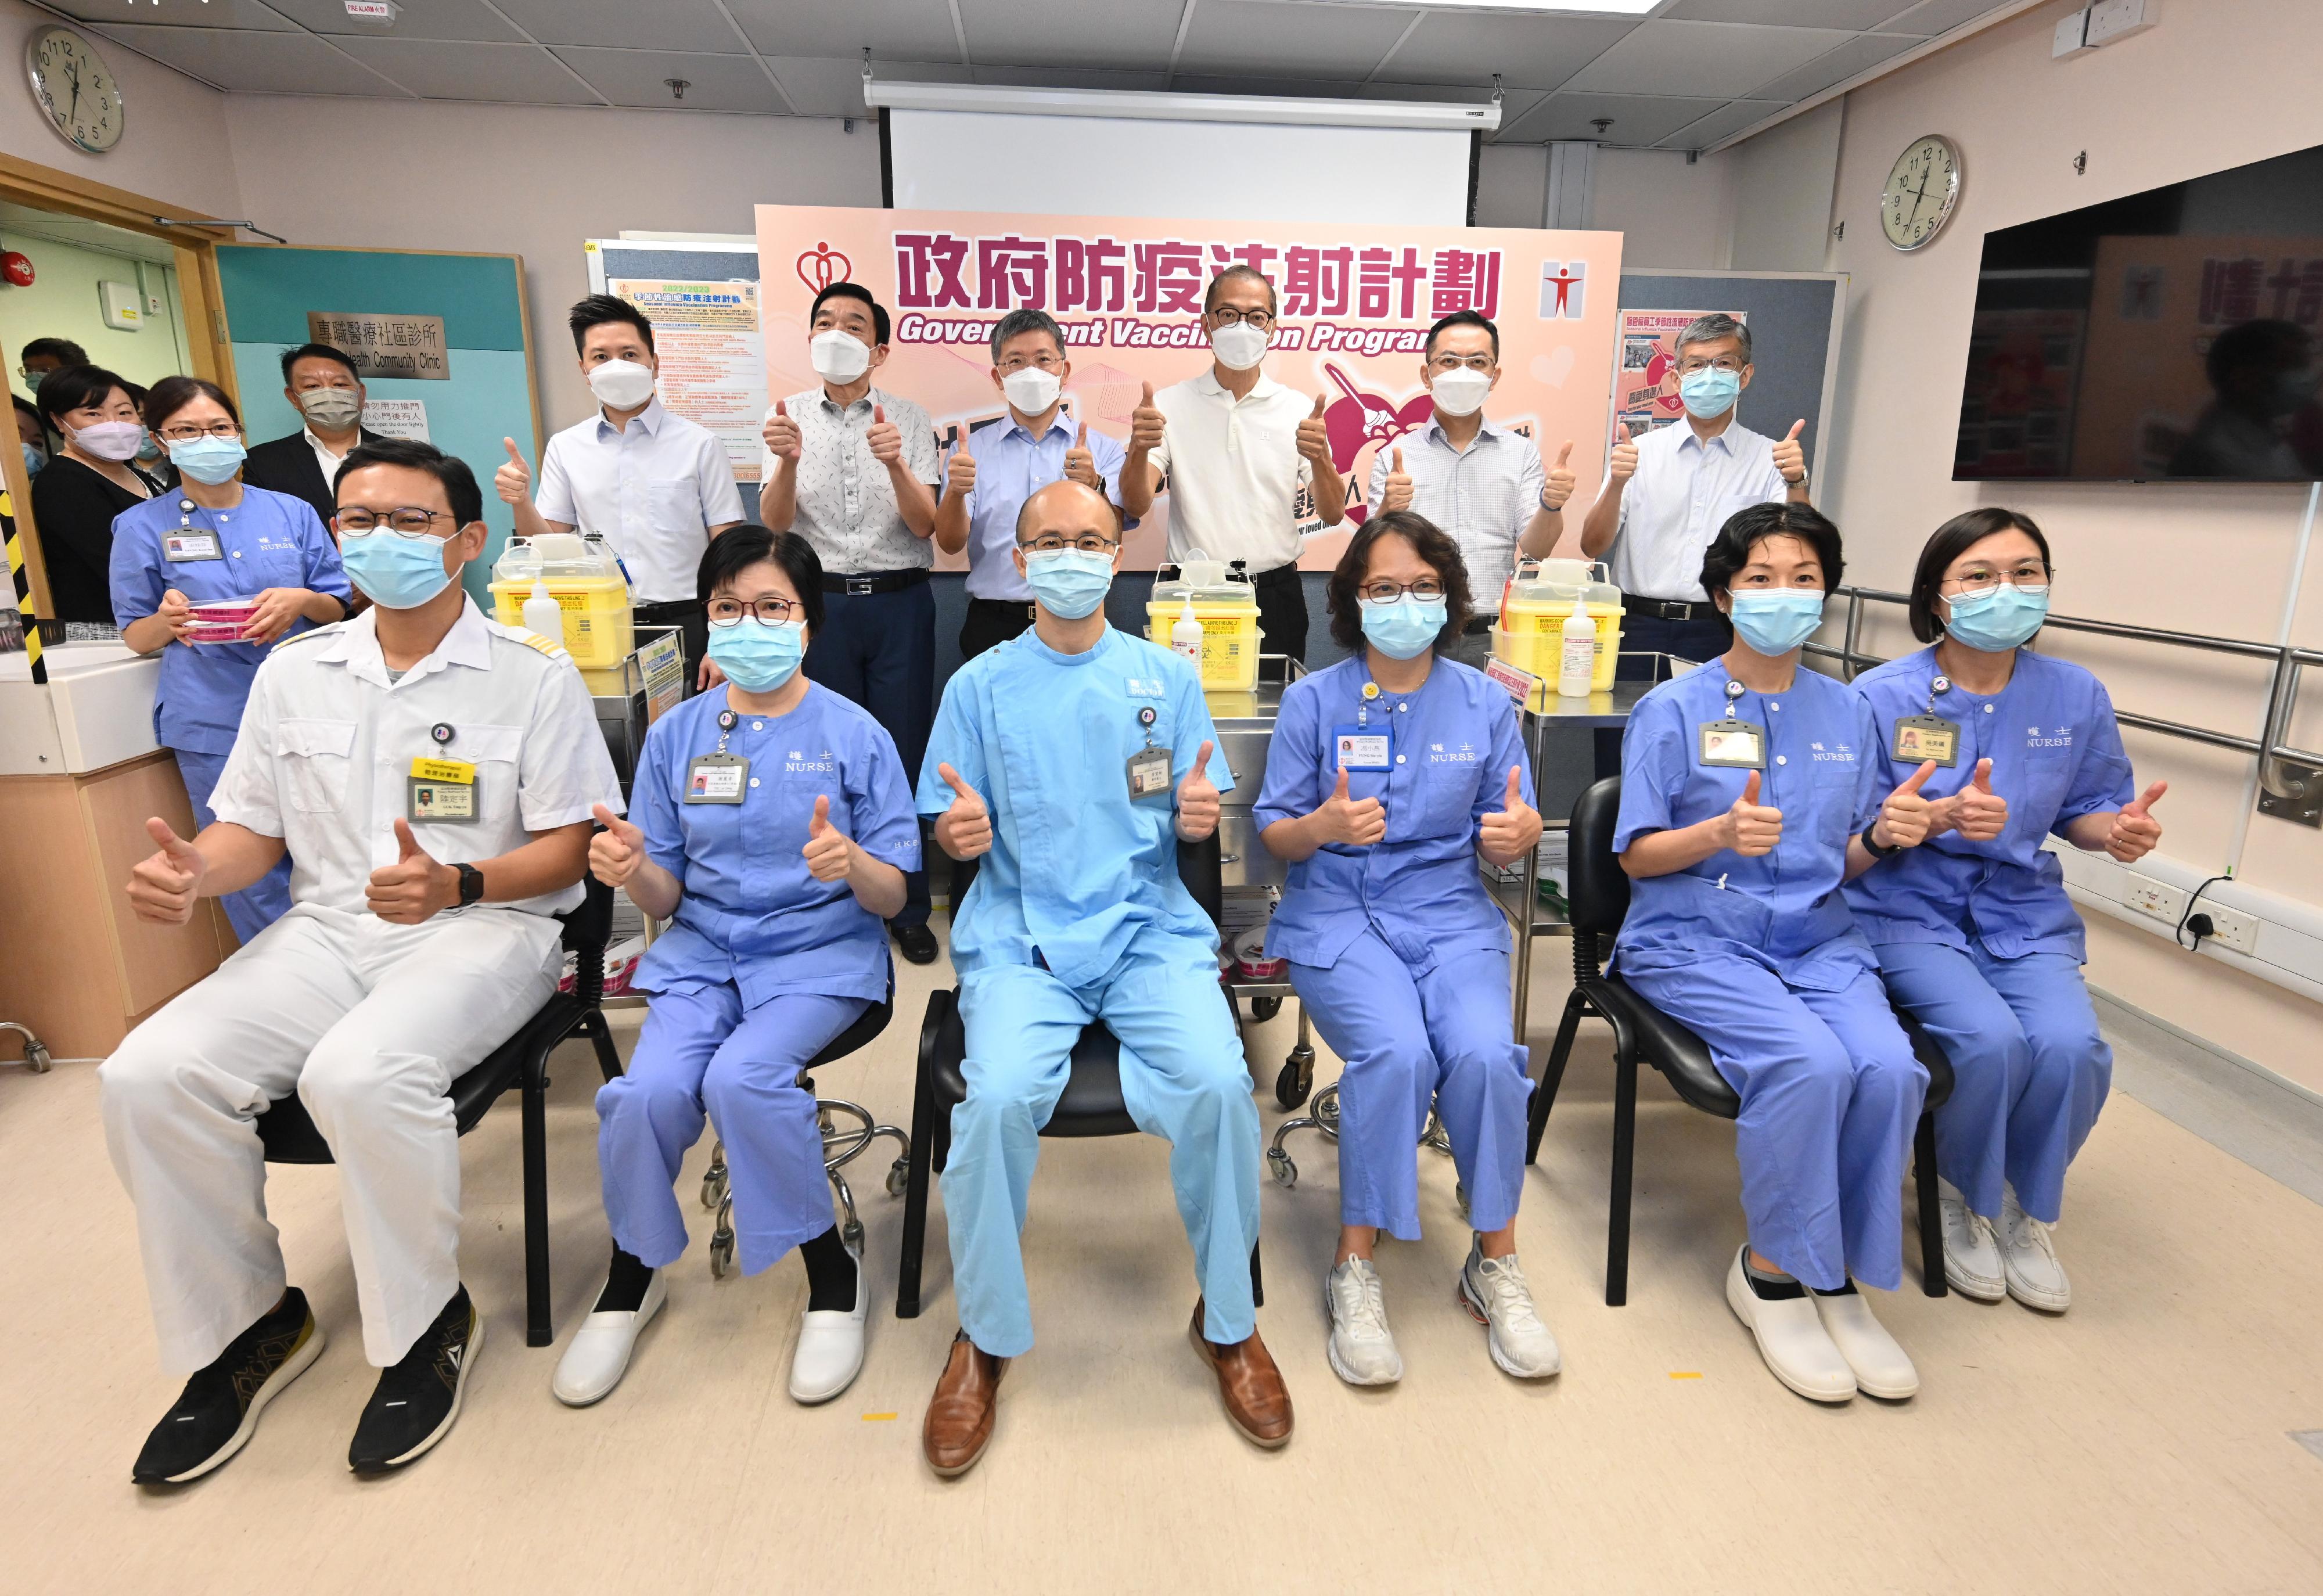 The Secretary for Health, Professor Lo Chung-mau (back row, third right); the Permanent Secretary for Health, Mr Thomas Chan (back row, fourth right); the Director of Health, Dr Ronald Lam (back row, second right); the Chairman of the Hospital Authority (HA), Mr Henry Fan (back row, fifth right); the Controller of the Centre for Health Protection of the Department of Health, Dr Edwin Tsui (back row, sixth right); and the Director of Cluster Services of the HA, Dr Simon Tang (back row, first right), joined by frontline healthcare workers at the Sai Wan Ho General Out-patient Clinic today (September 22) urged members of the public to receive the seasonal influenza vaccination and COVID-19 vaccine as early as possible.